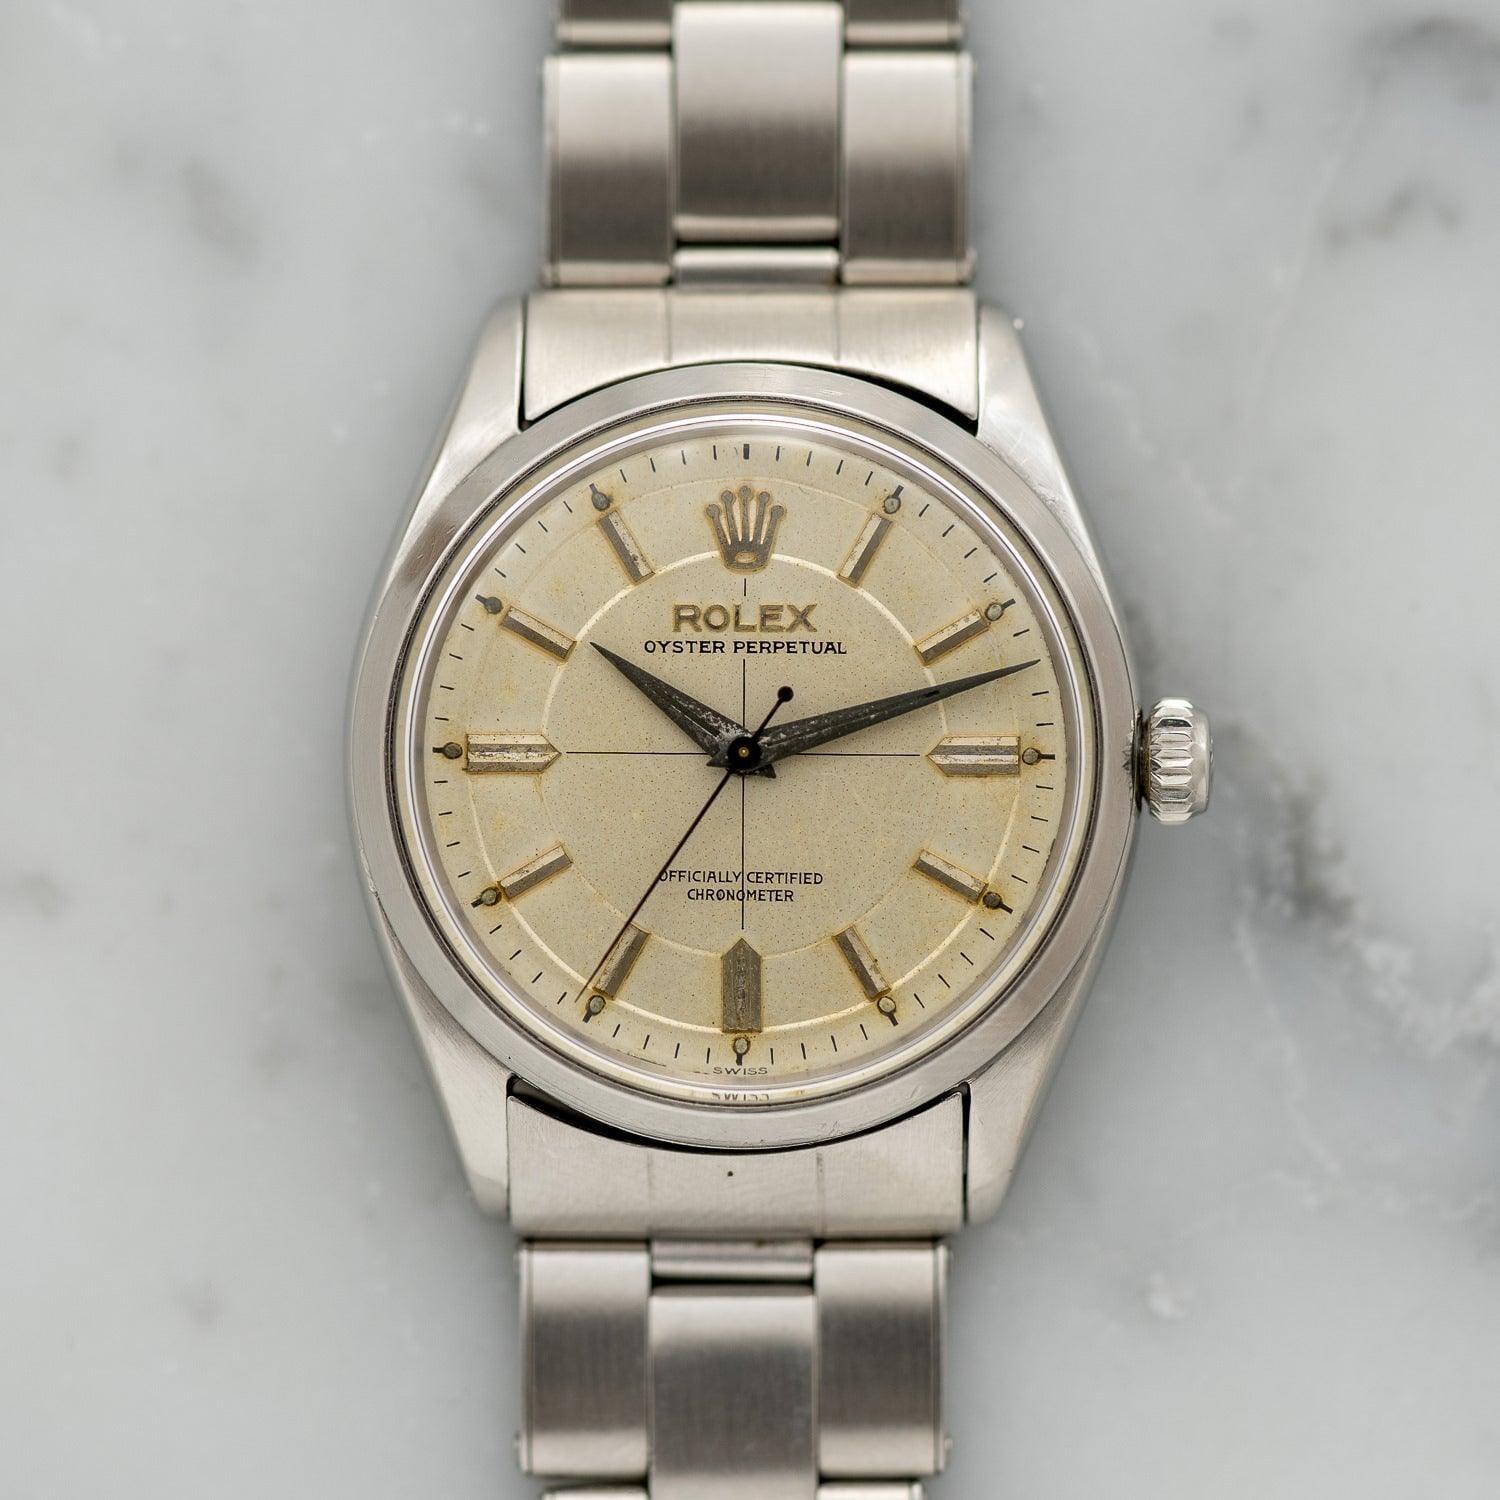 ROLEX Oyster Perpetual 6564 Sector Dial - Arbitro